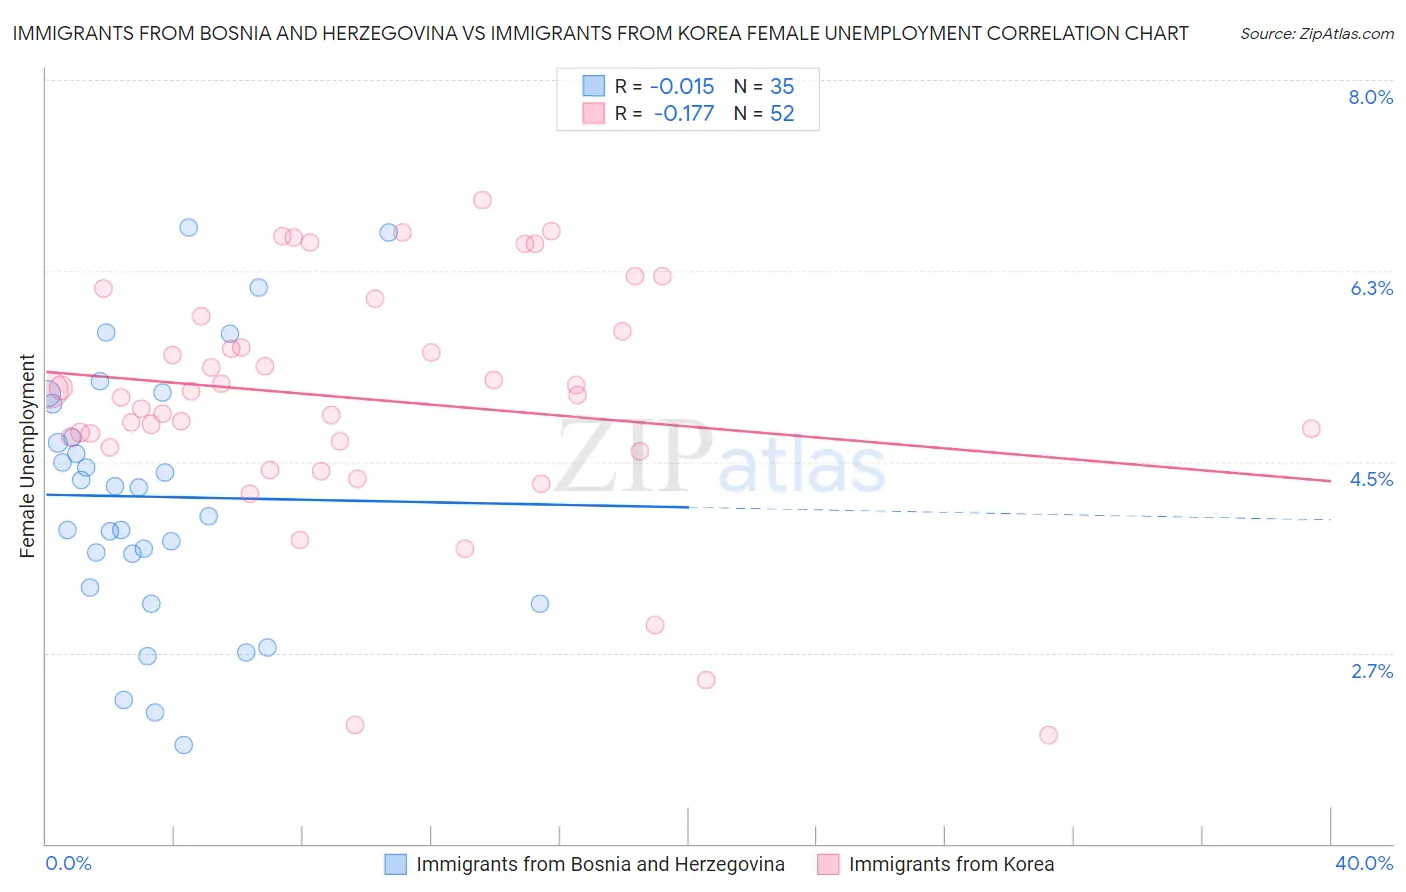 Immigrants from Bosnia and Herzegovina vs Immigrants from Korea Female Unemployment